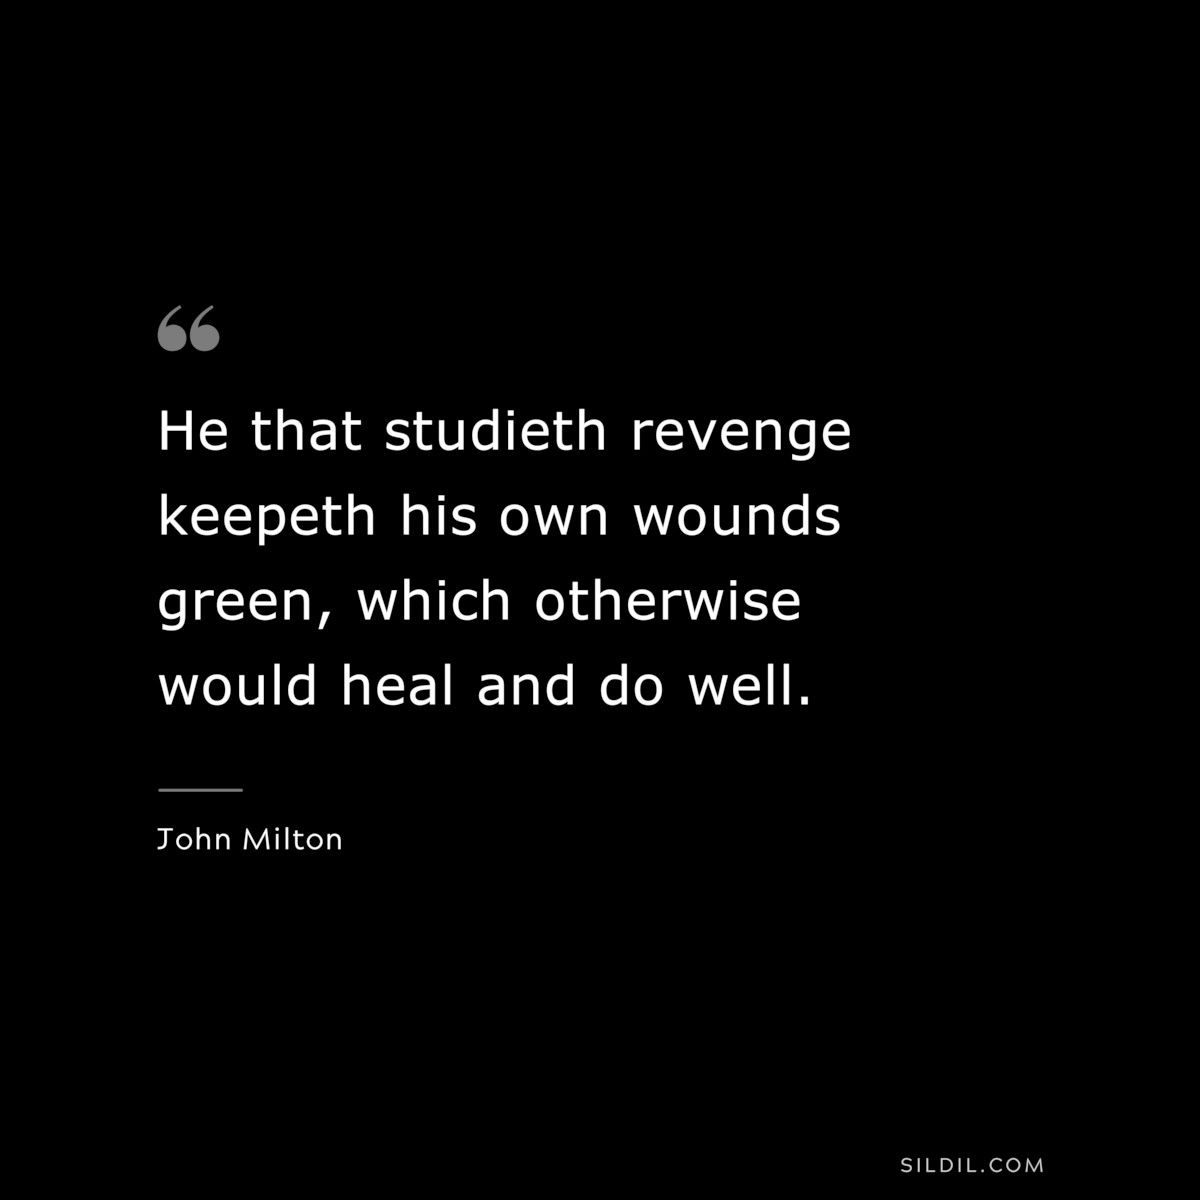 He that studieth revenge keepeth his own wounds green, which otherwise would heal and do well. ― John Milton